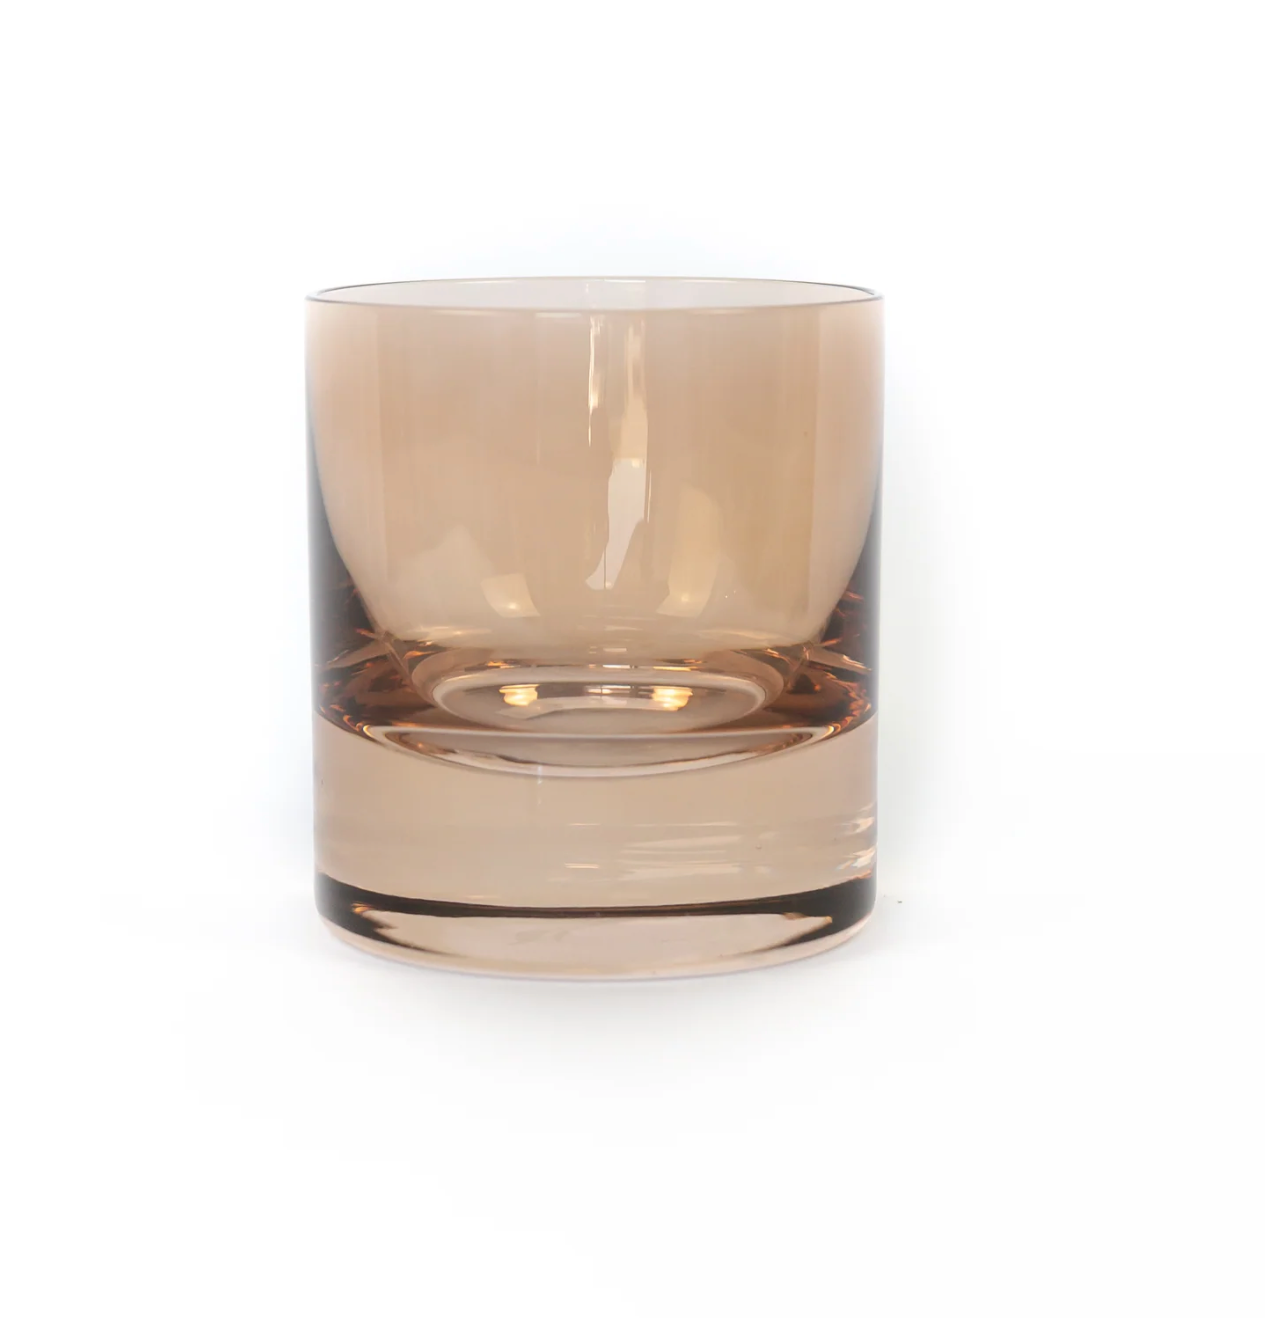 Estelle Colored Wine Stemless Glasses - Set of 6 {Amber Smoke}